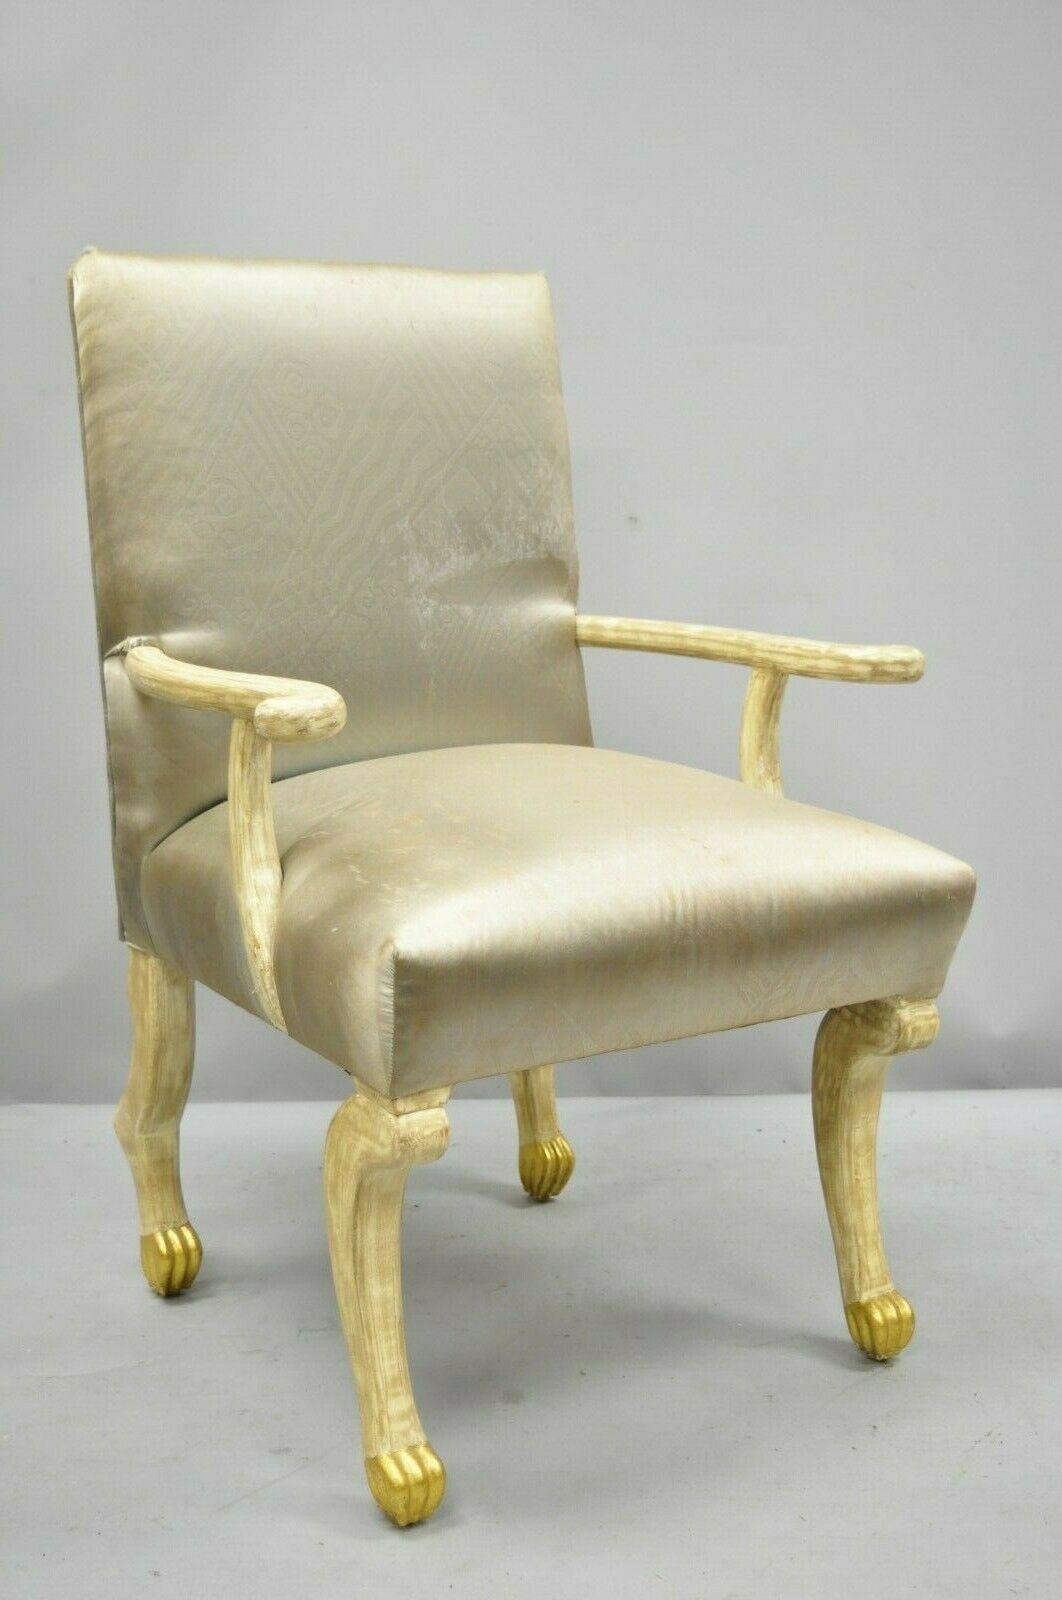 20th Century 8 Hoof Paw Foot Regency Dining Chairs After the Etruscan Chair by John Dickinson